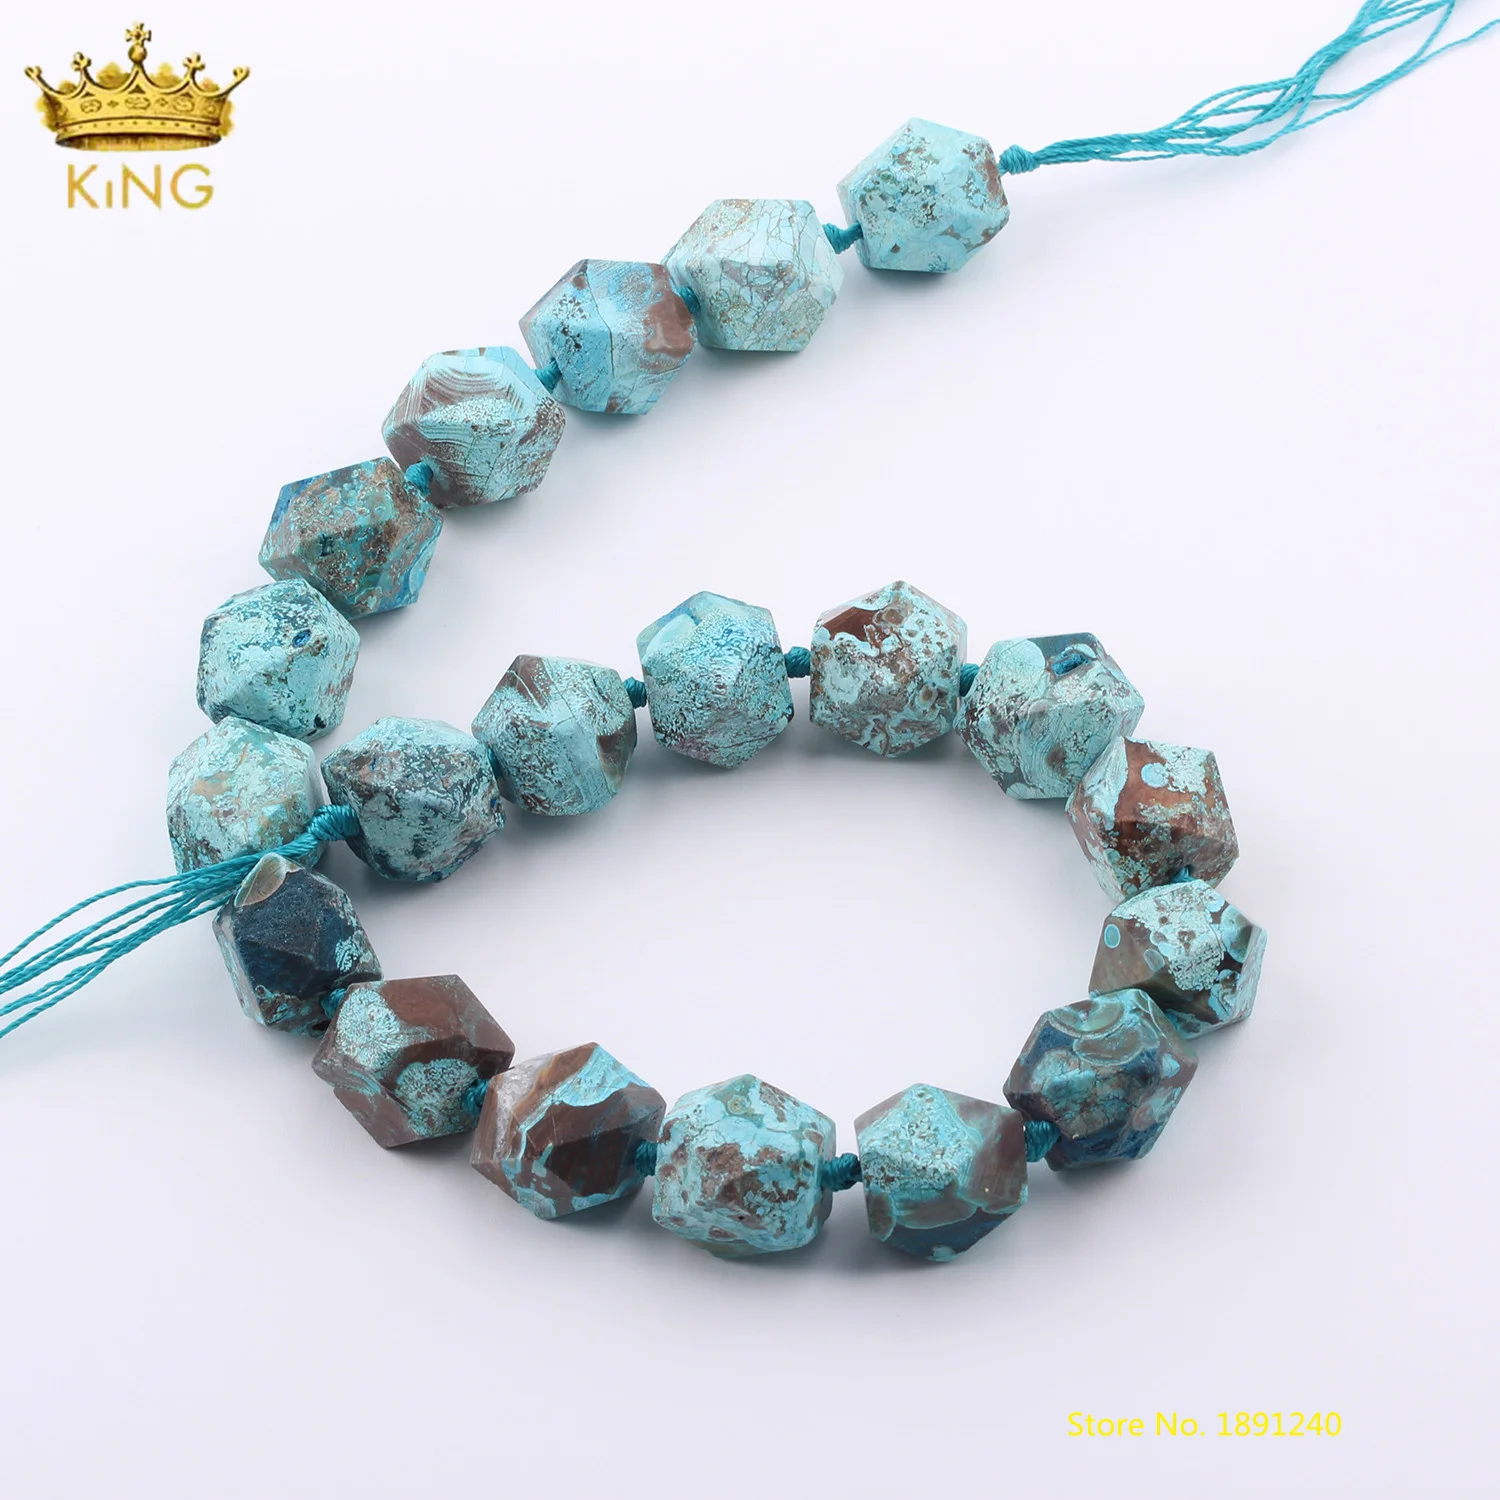 

Approx 20pcs/Strand Natural Ocean Agates Stone Faceted Nugget Loose Beads DIY Jewelry,Chunky Onyx Stone Beads Bracelet Making